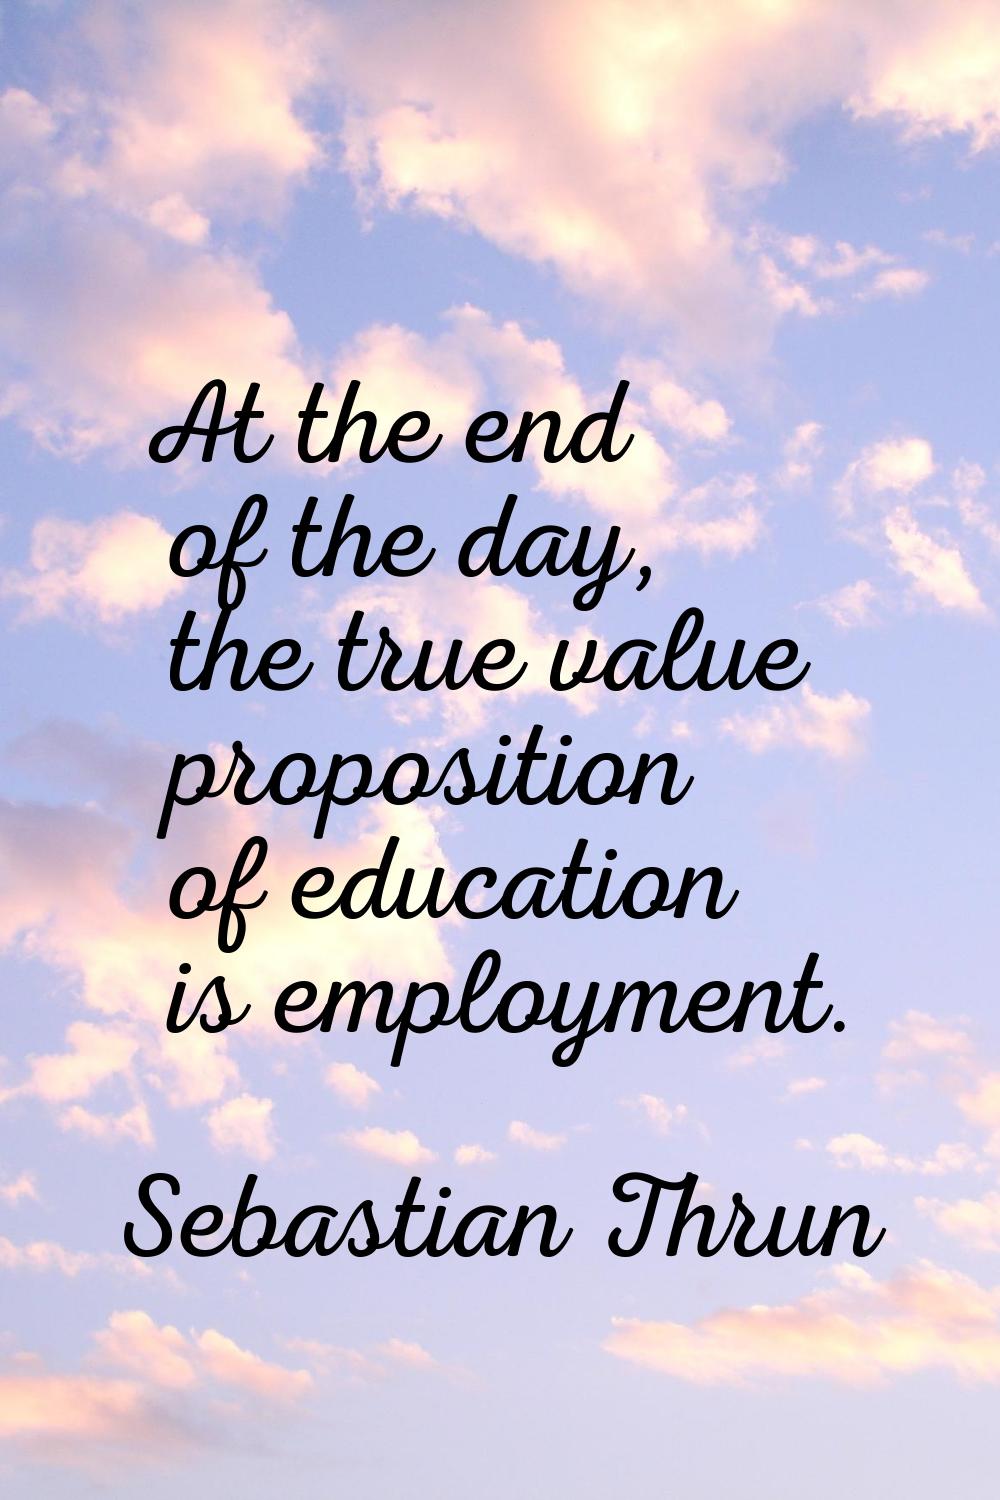 At the end of the day, the true value proposition of education is employment.